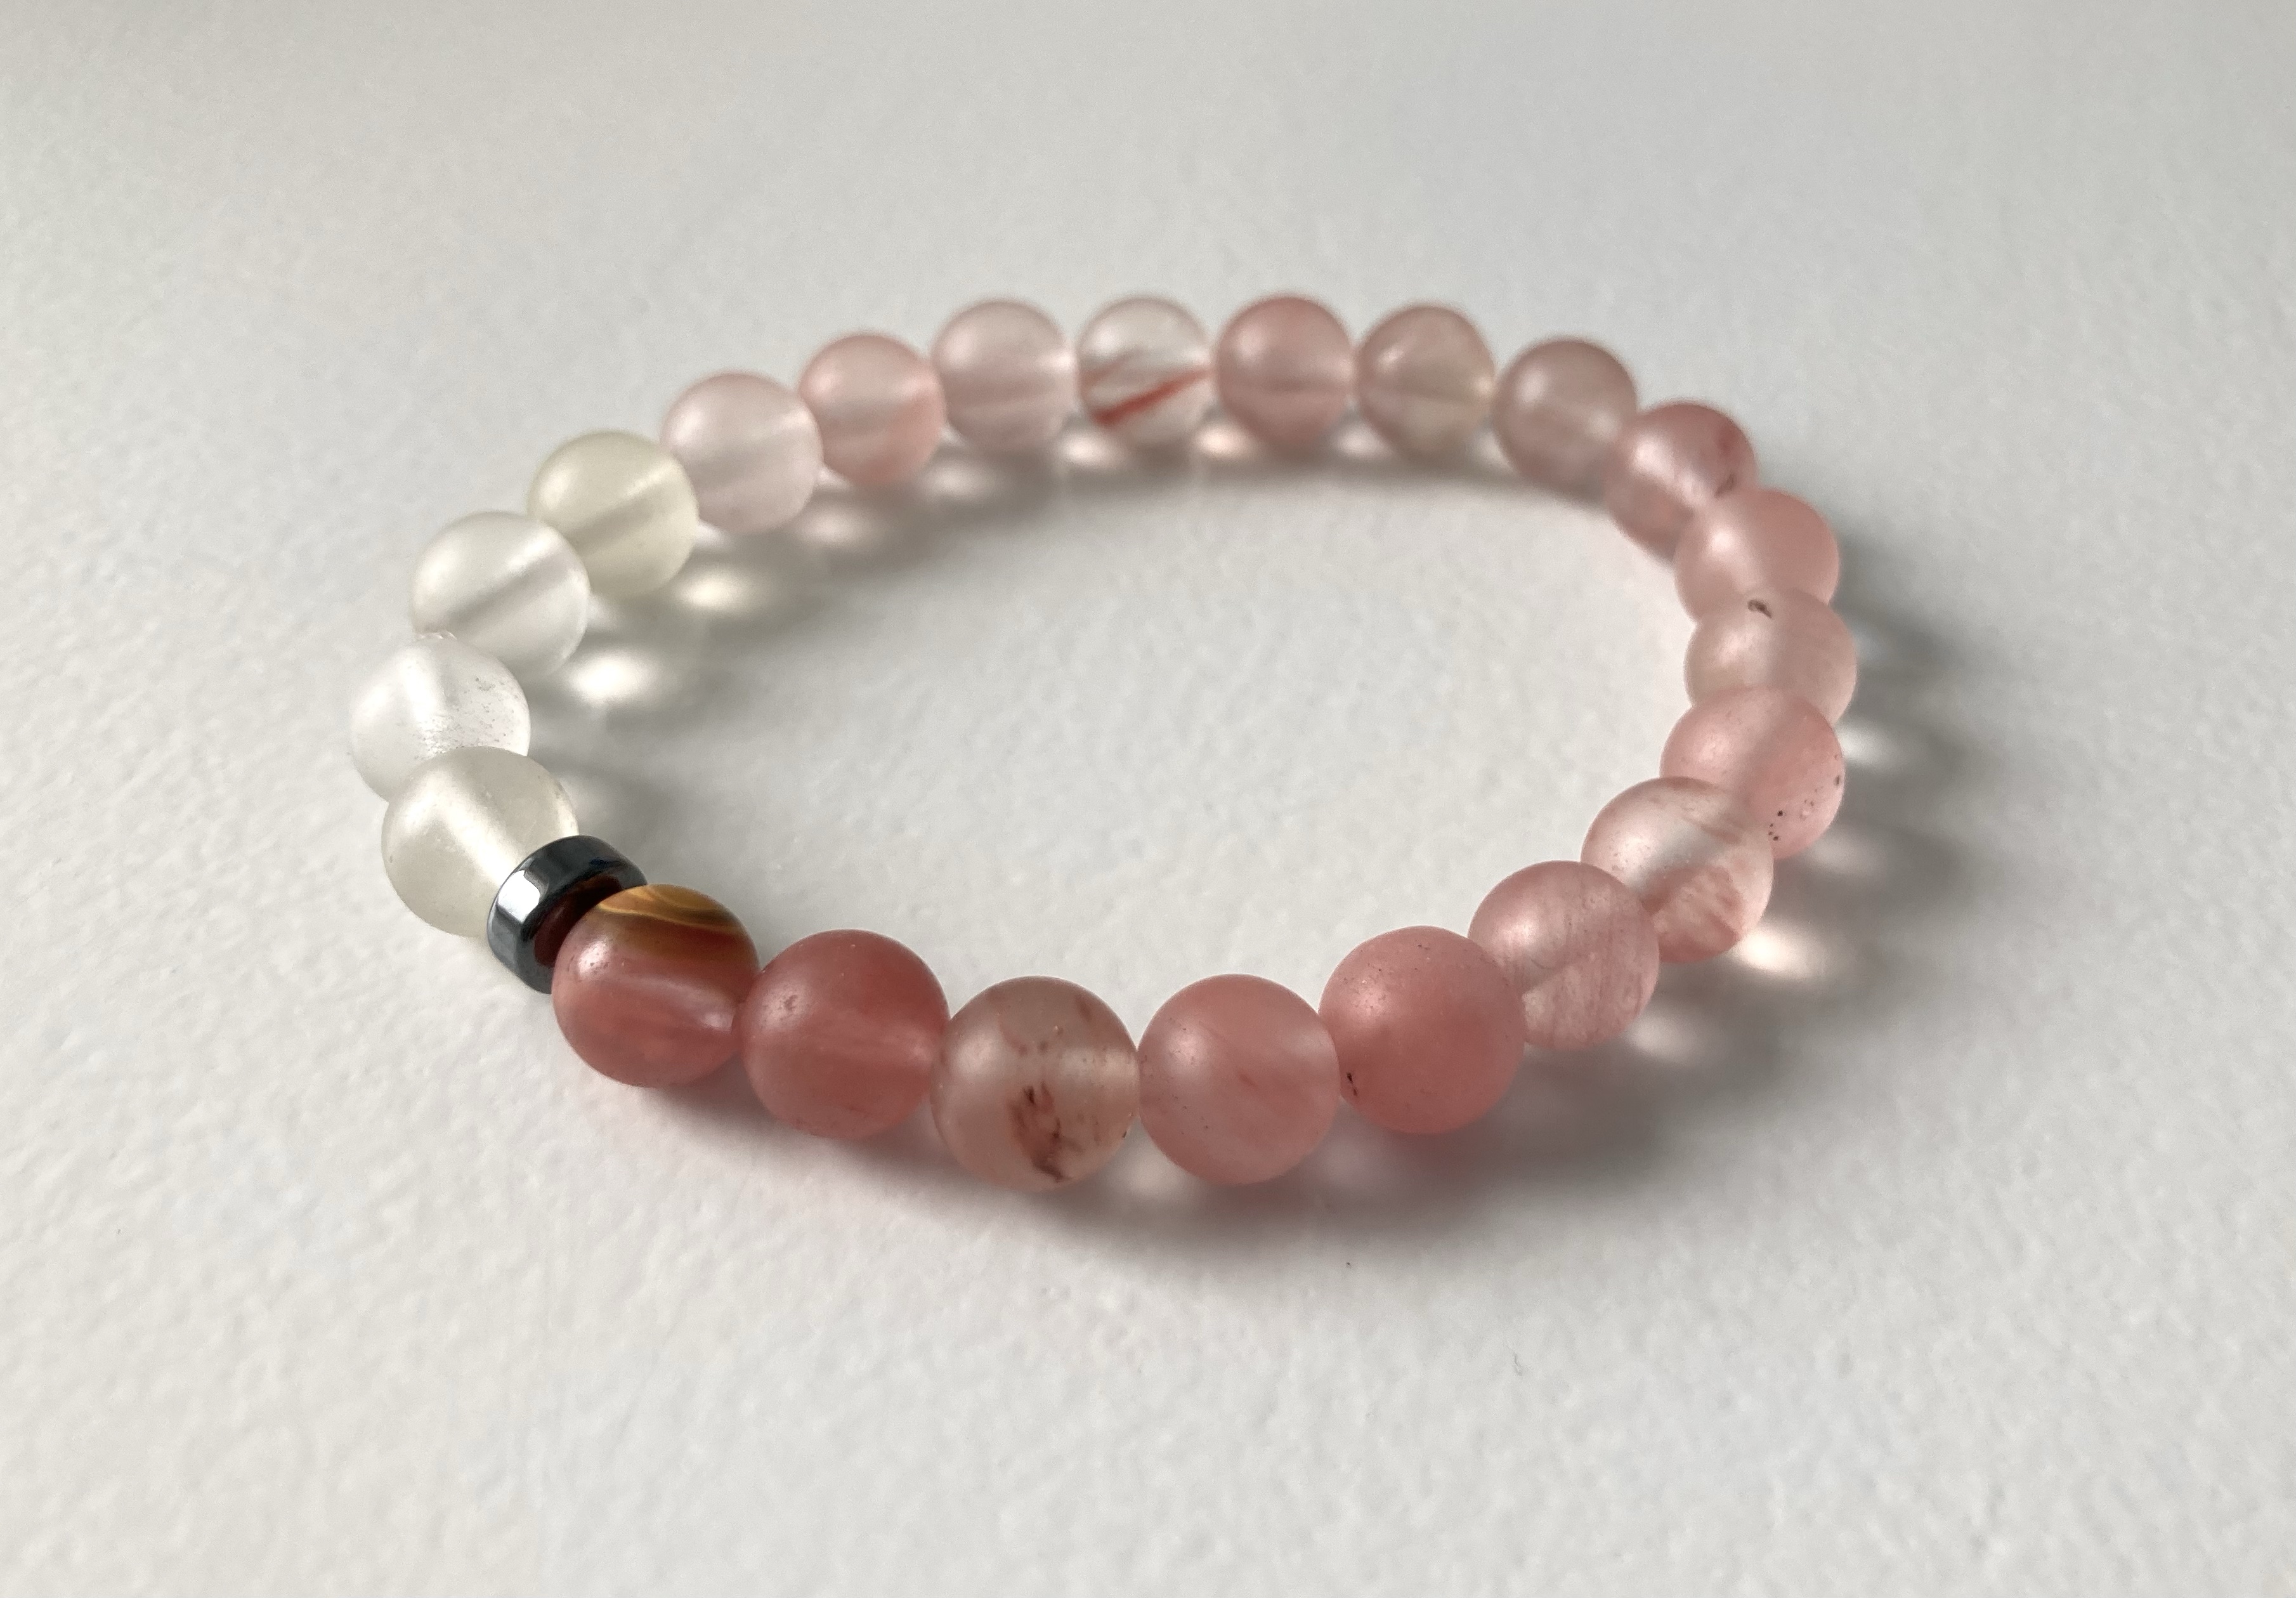 Bracelet from recycled glass beads in pink, white and transparent shades, and a black tourmaline to hide the knot. (Copyright Maria Liv)